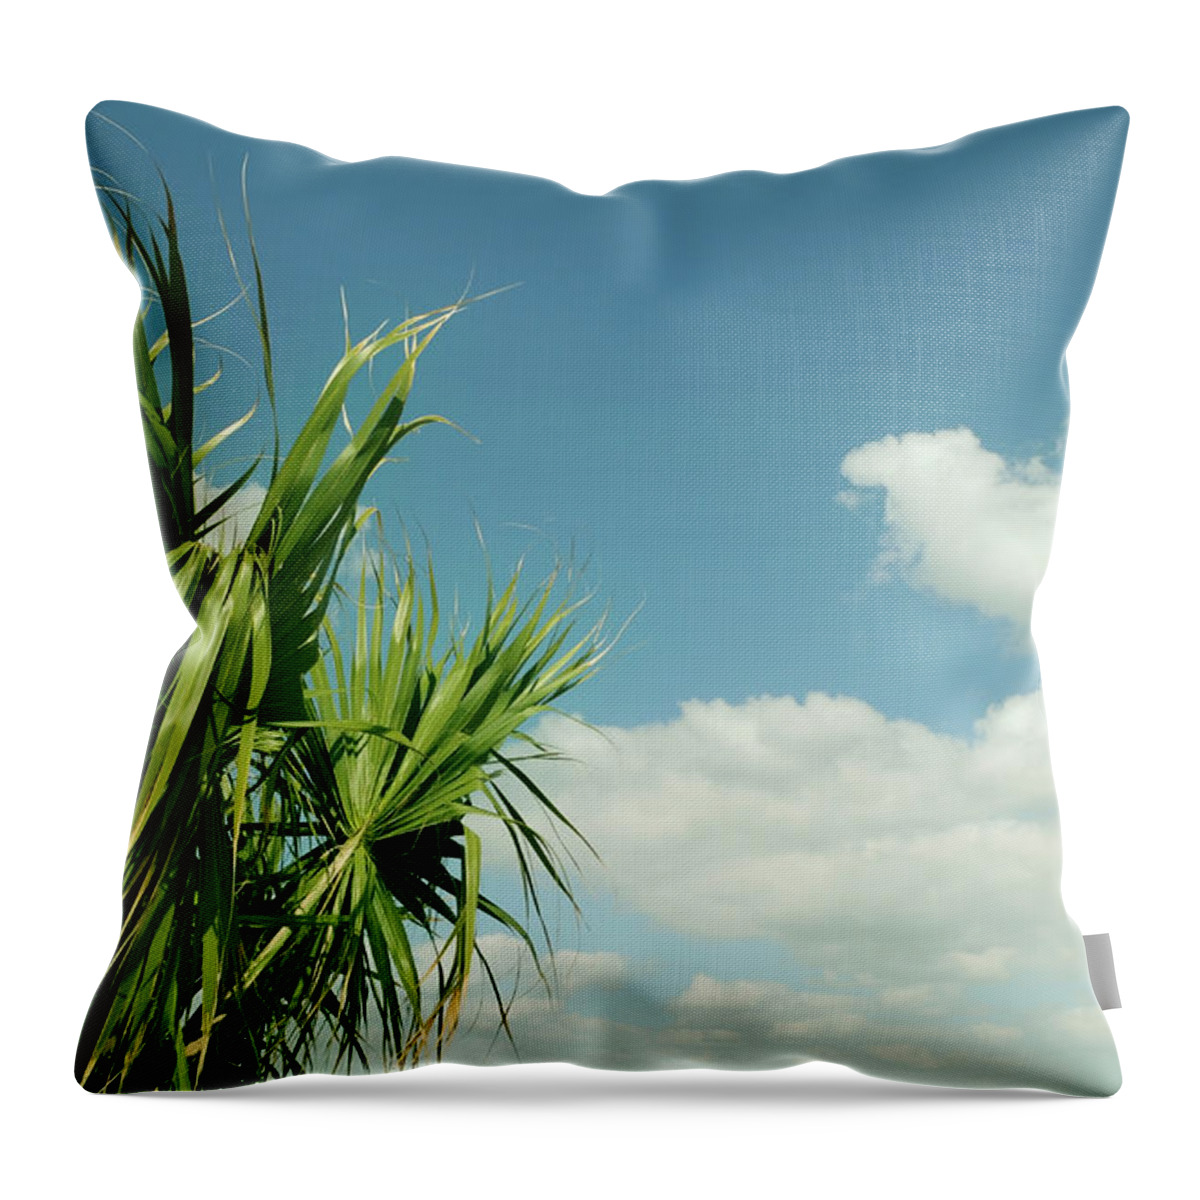 Scenics Throw Pillow featuring the photograph Palms And Clouds by Sstop